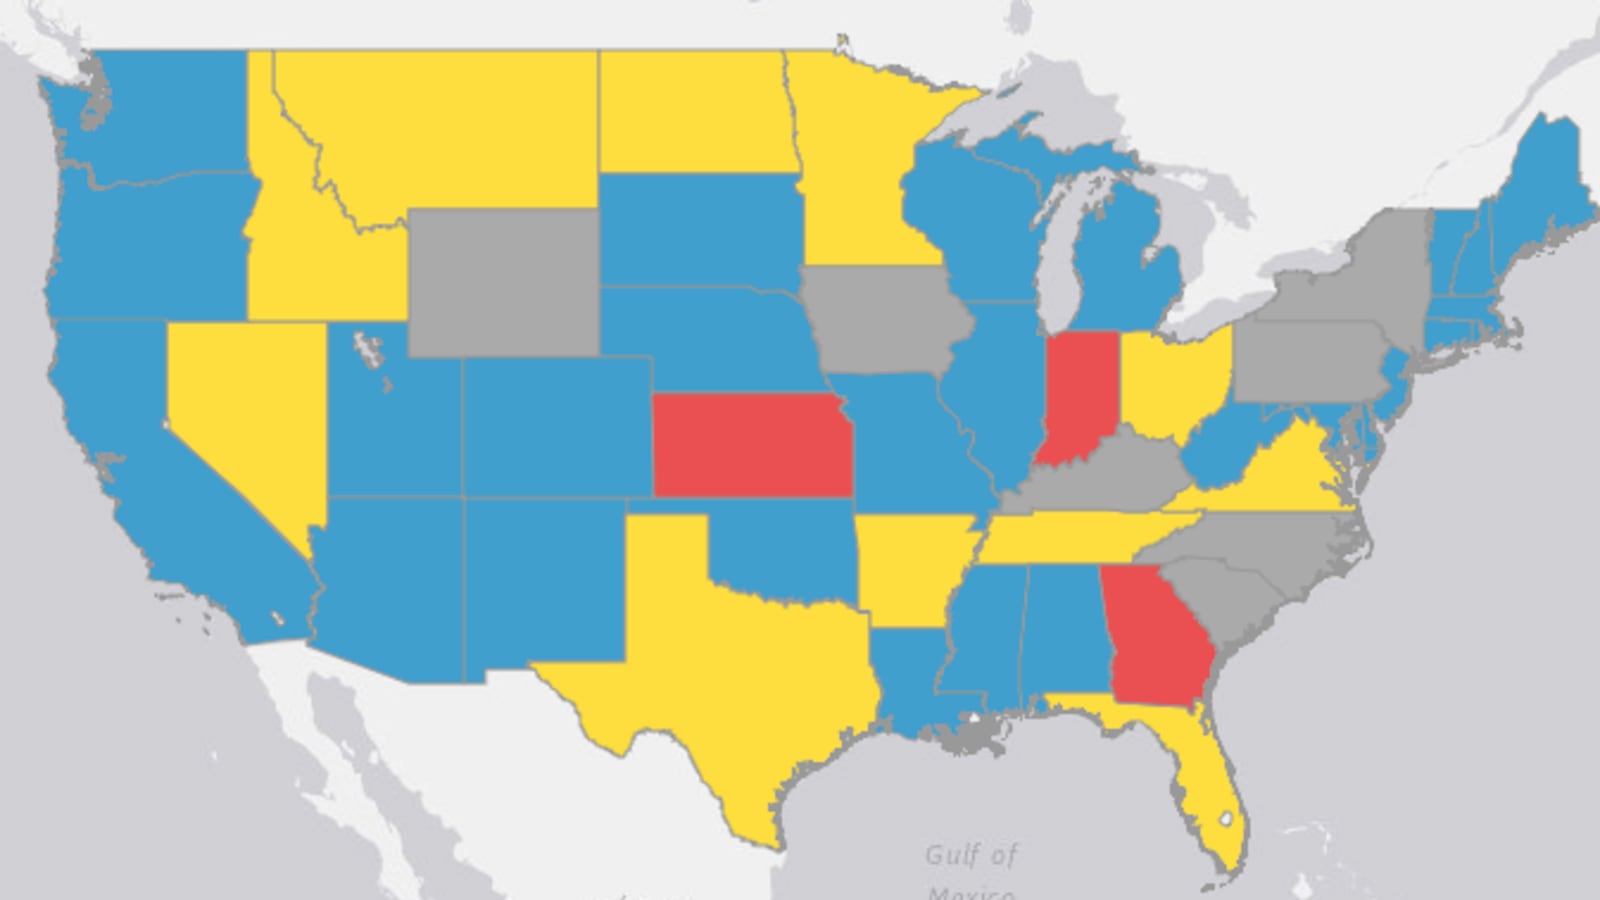 A map in a new report shows which states have suffered glitches during their transition to online testing. Yellow signifies glitches like the ones Tennessee faced.